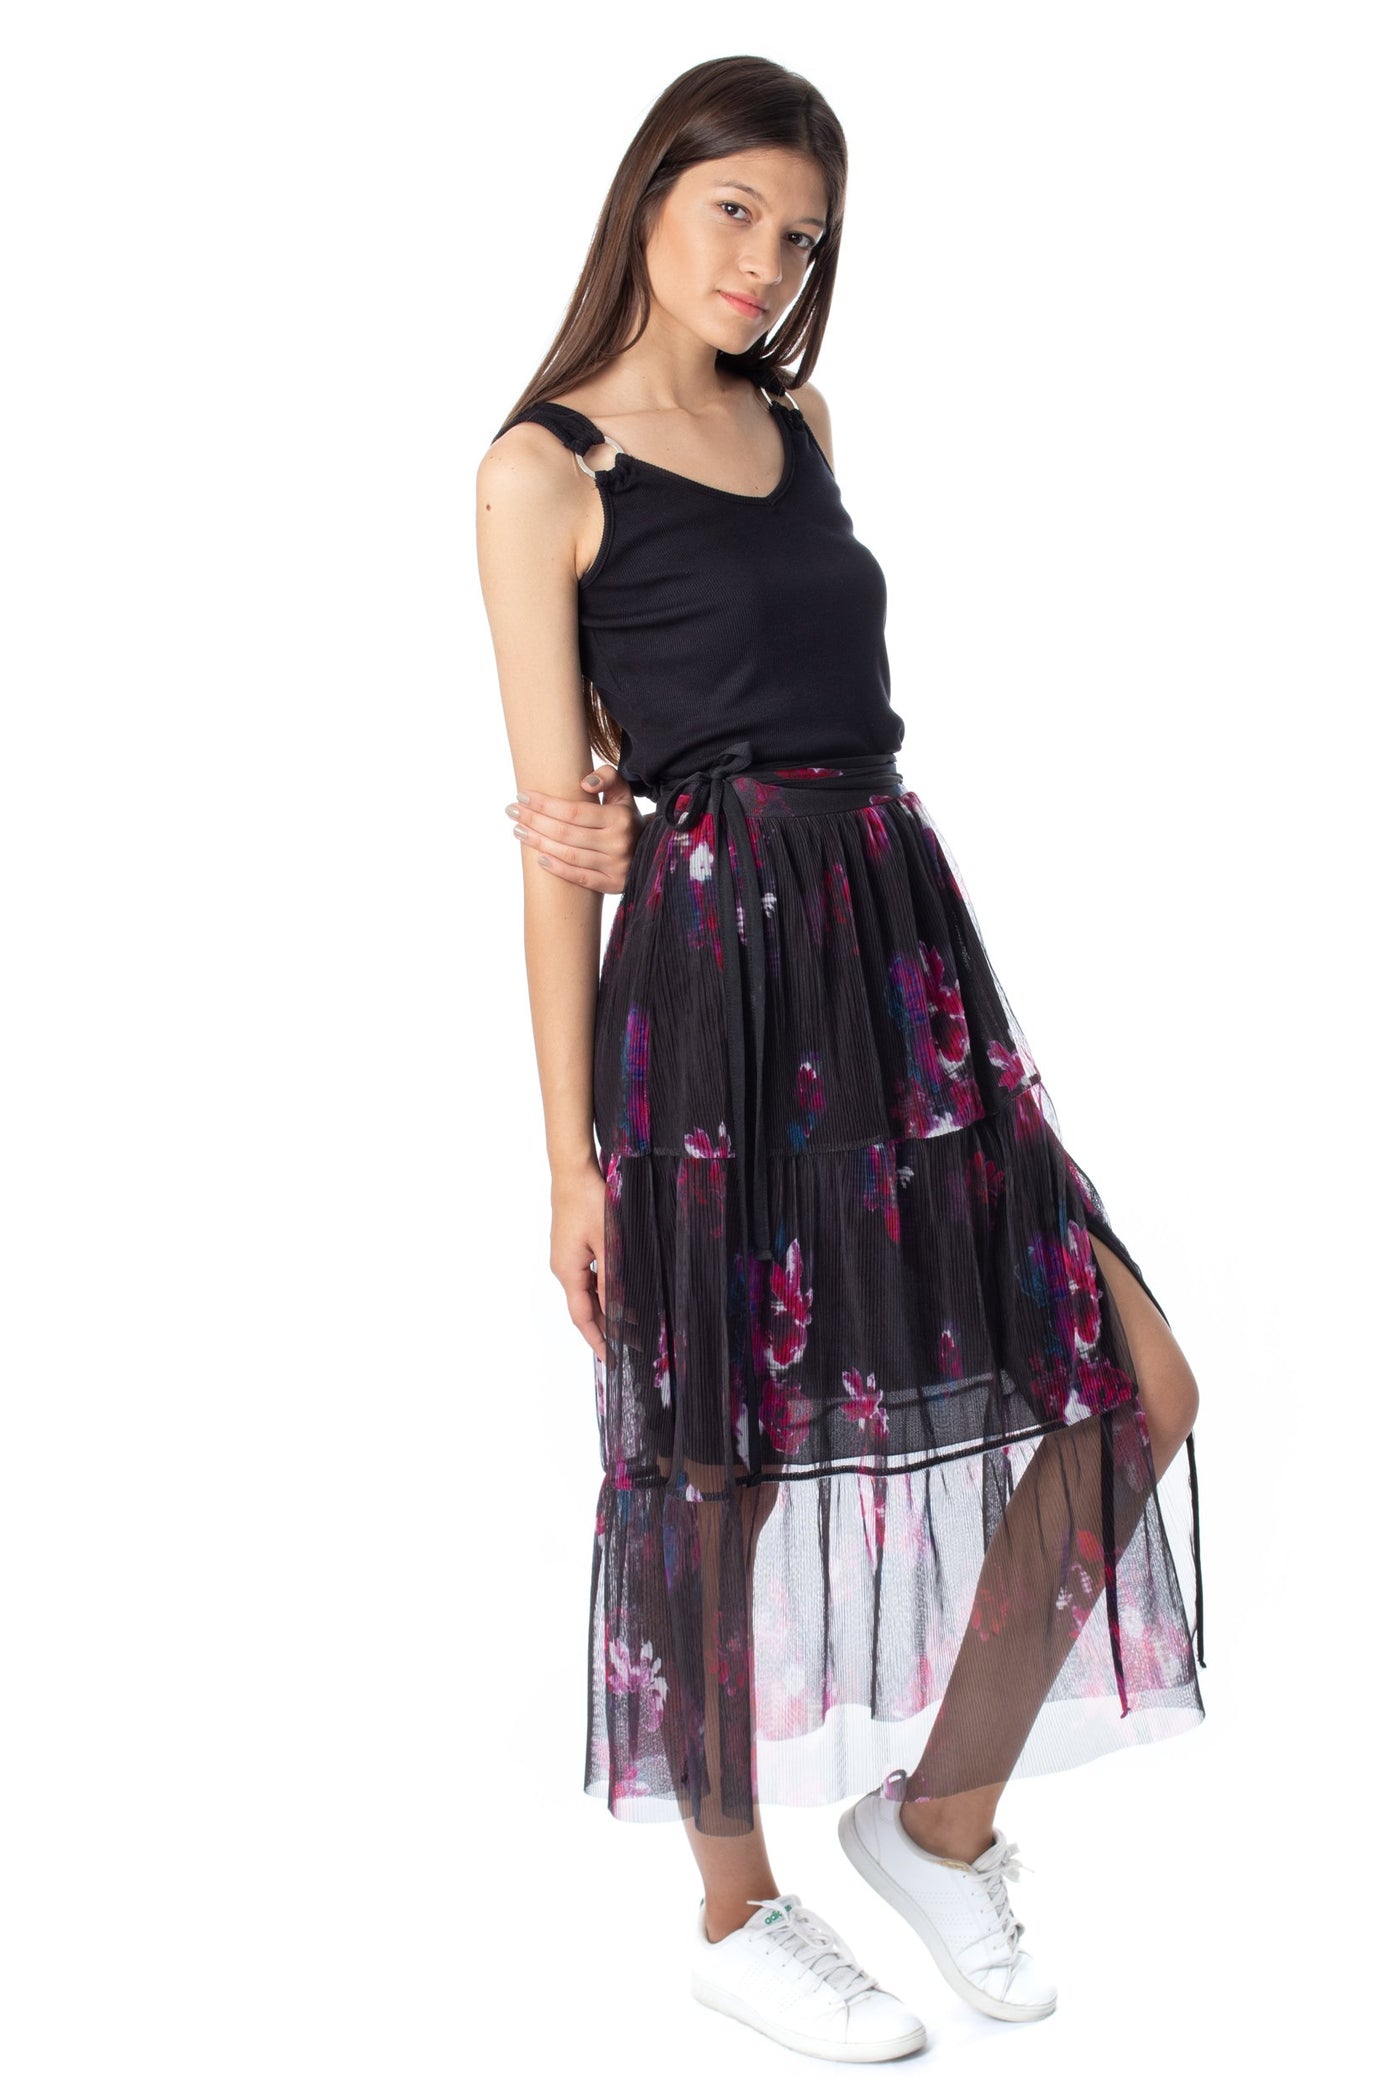 chassca floral printed gypsy skirt - Breakmood